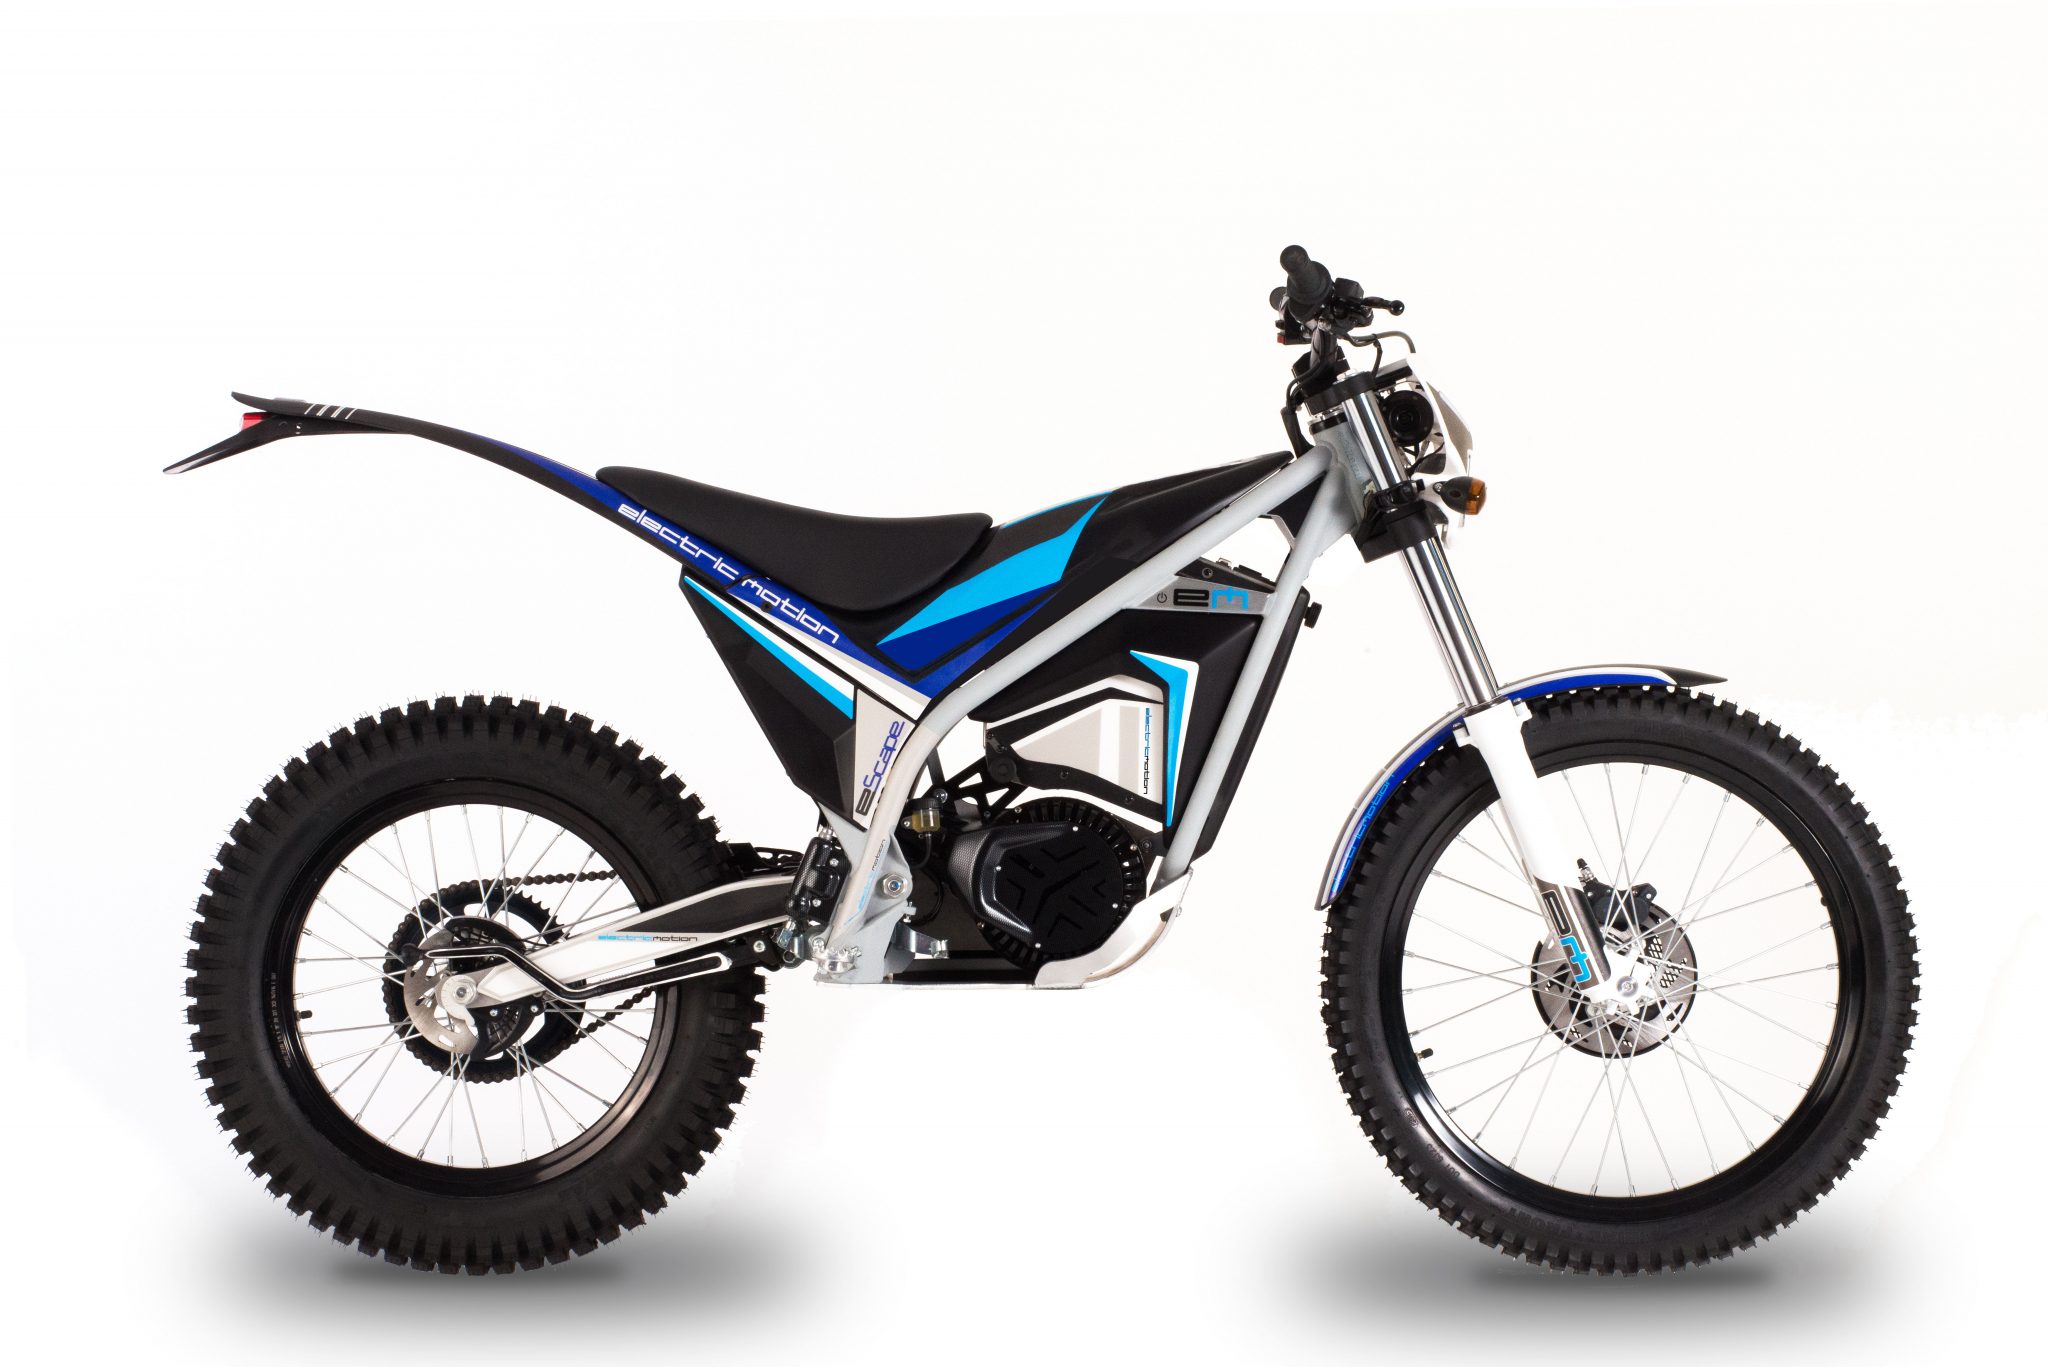 The Best Electric Dirt Bikes You Can Ride in 2020